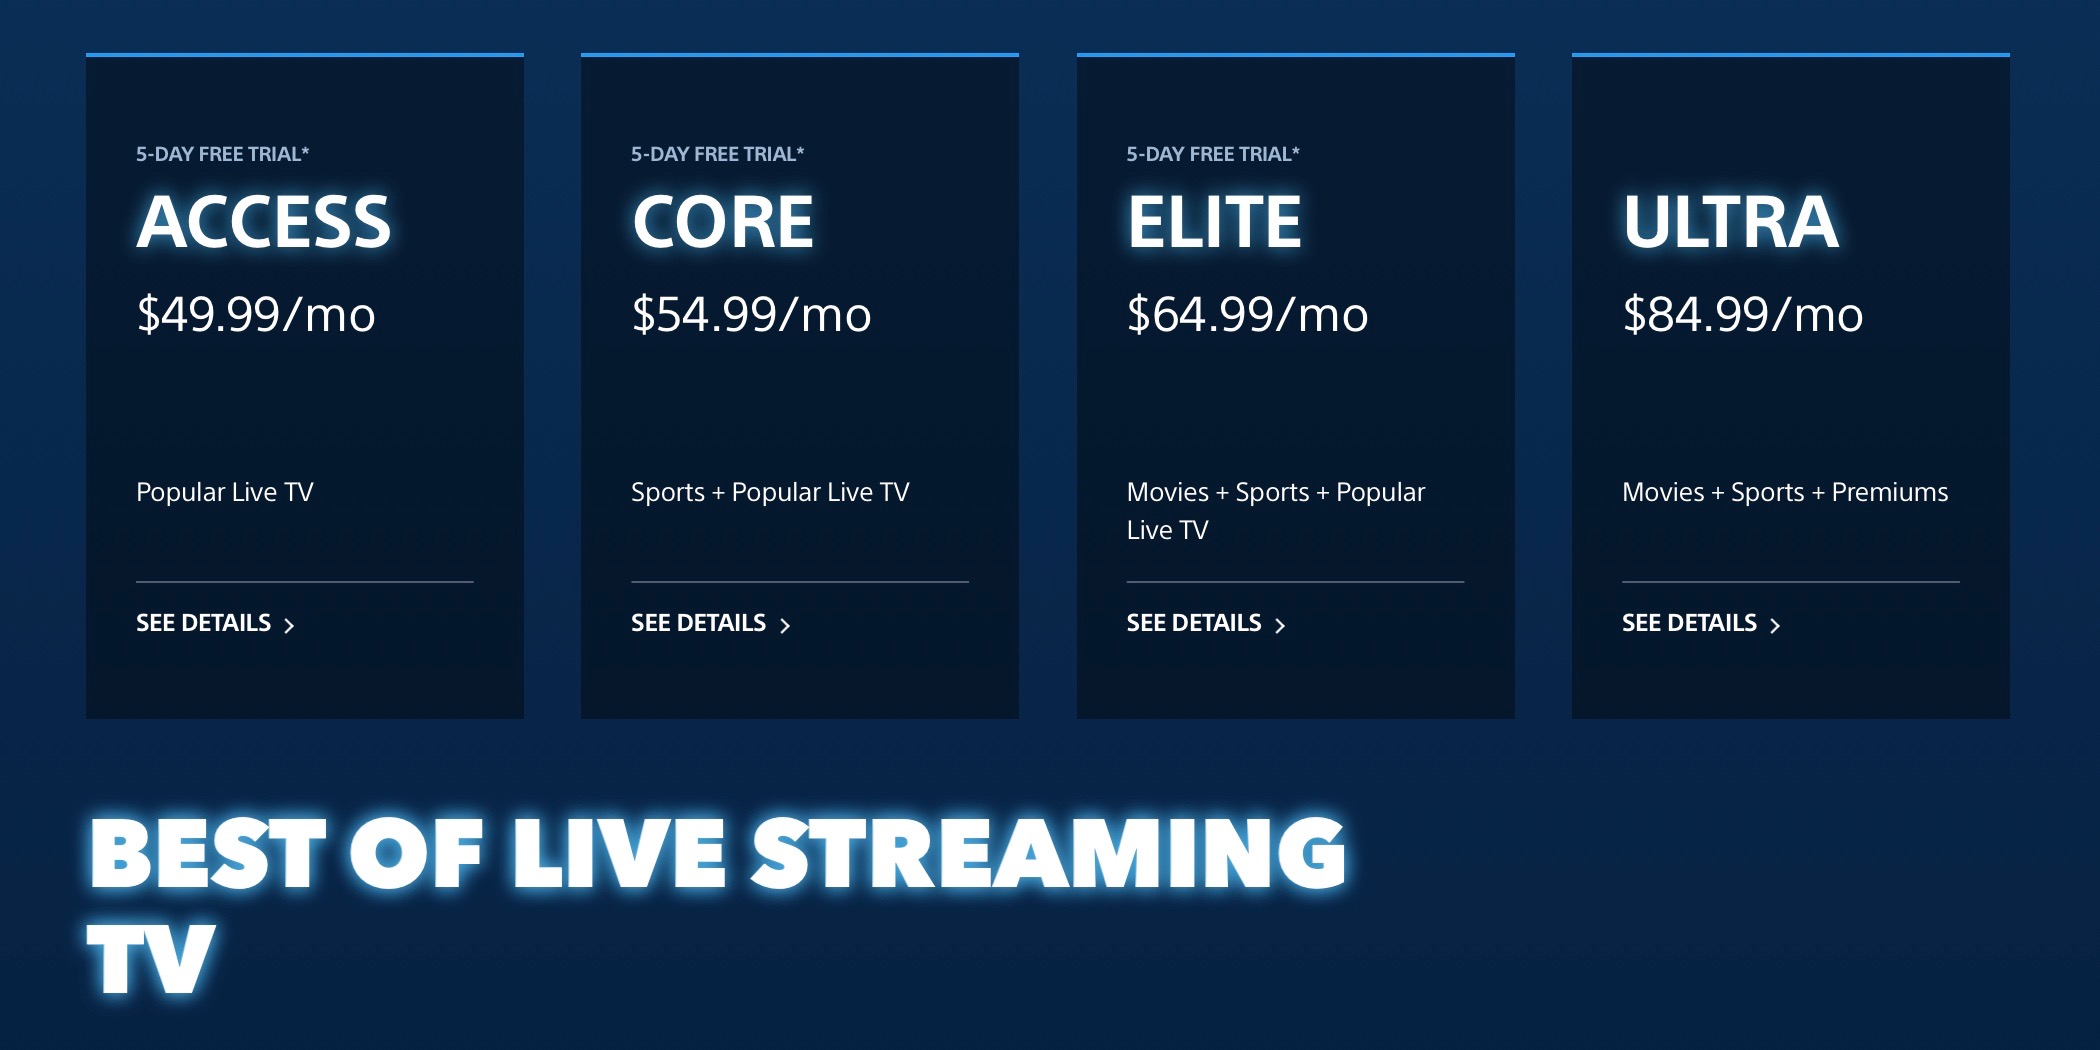 PlayStation Vue ups all Live TV streaming plans by $5